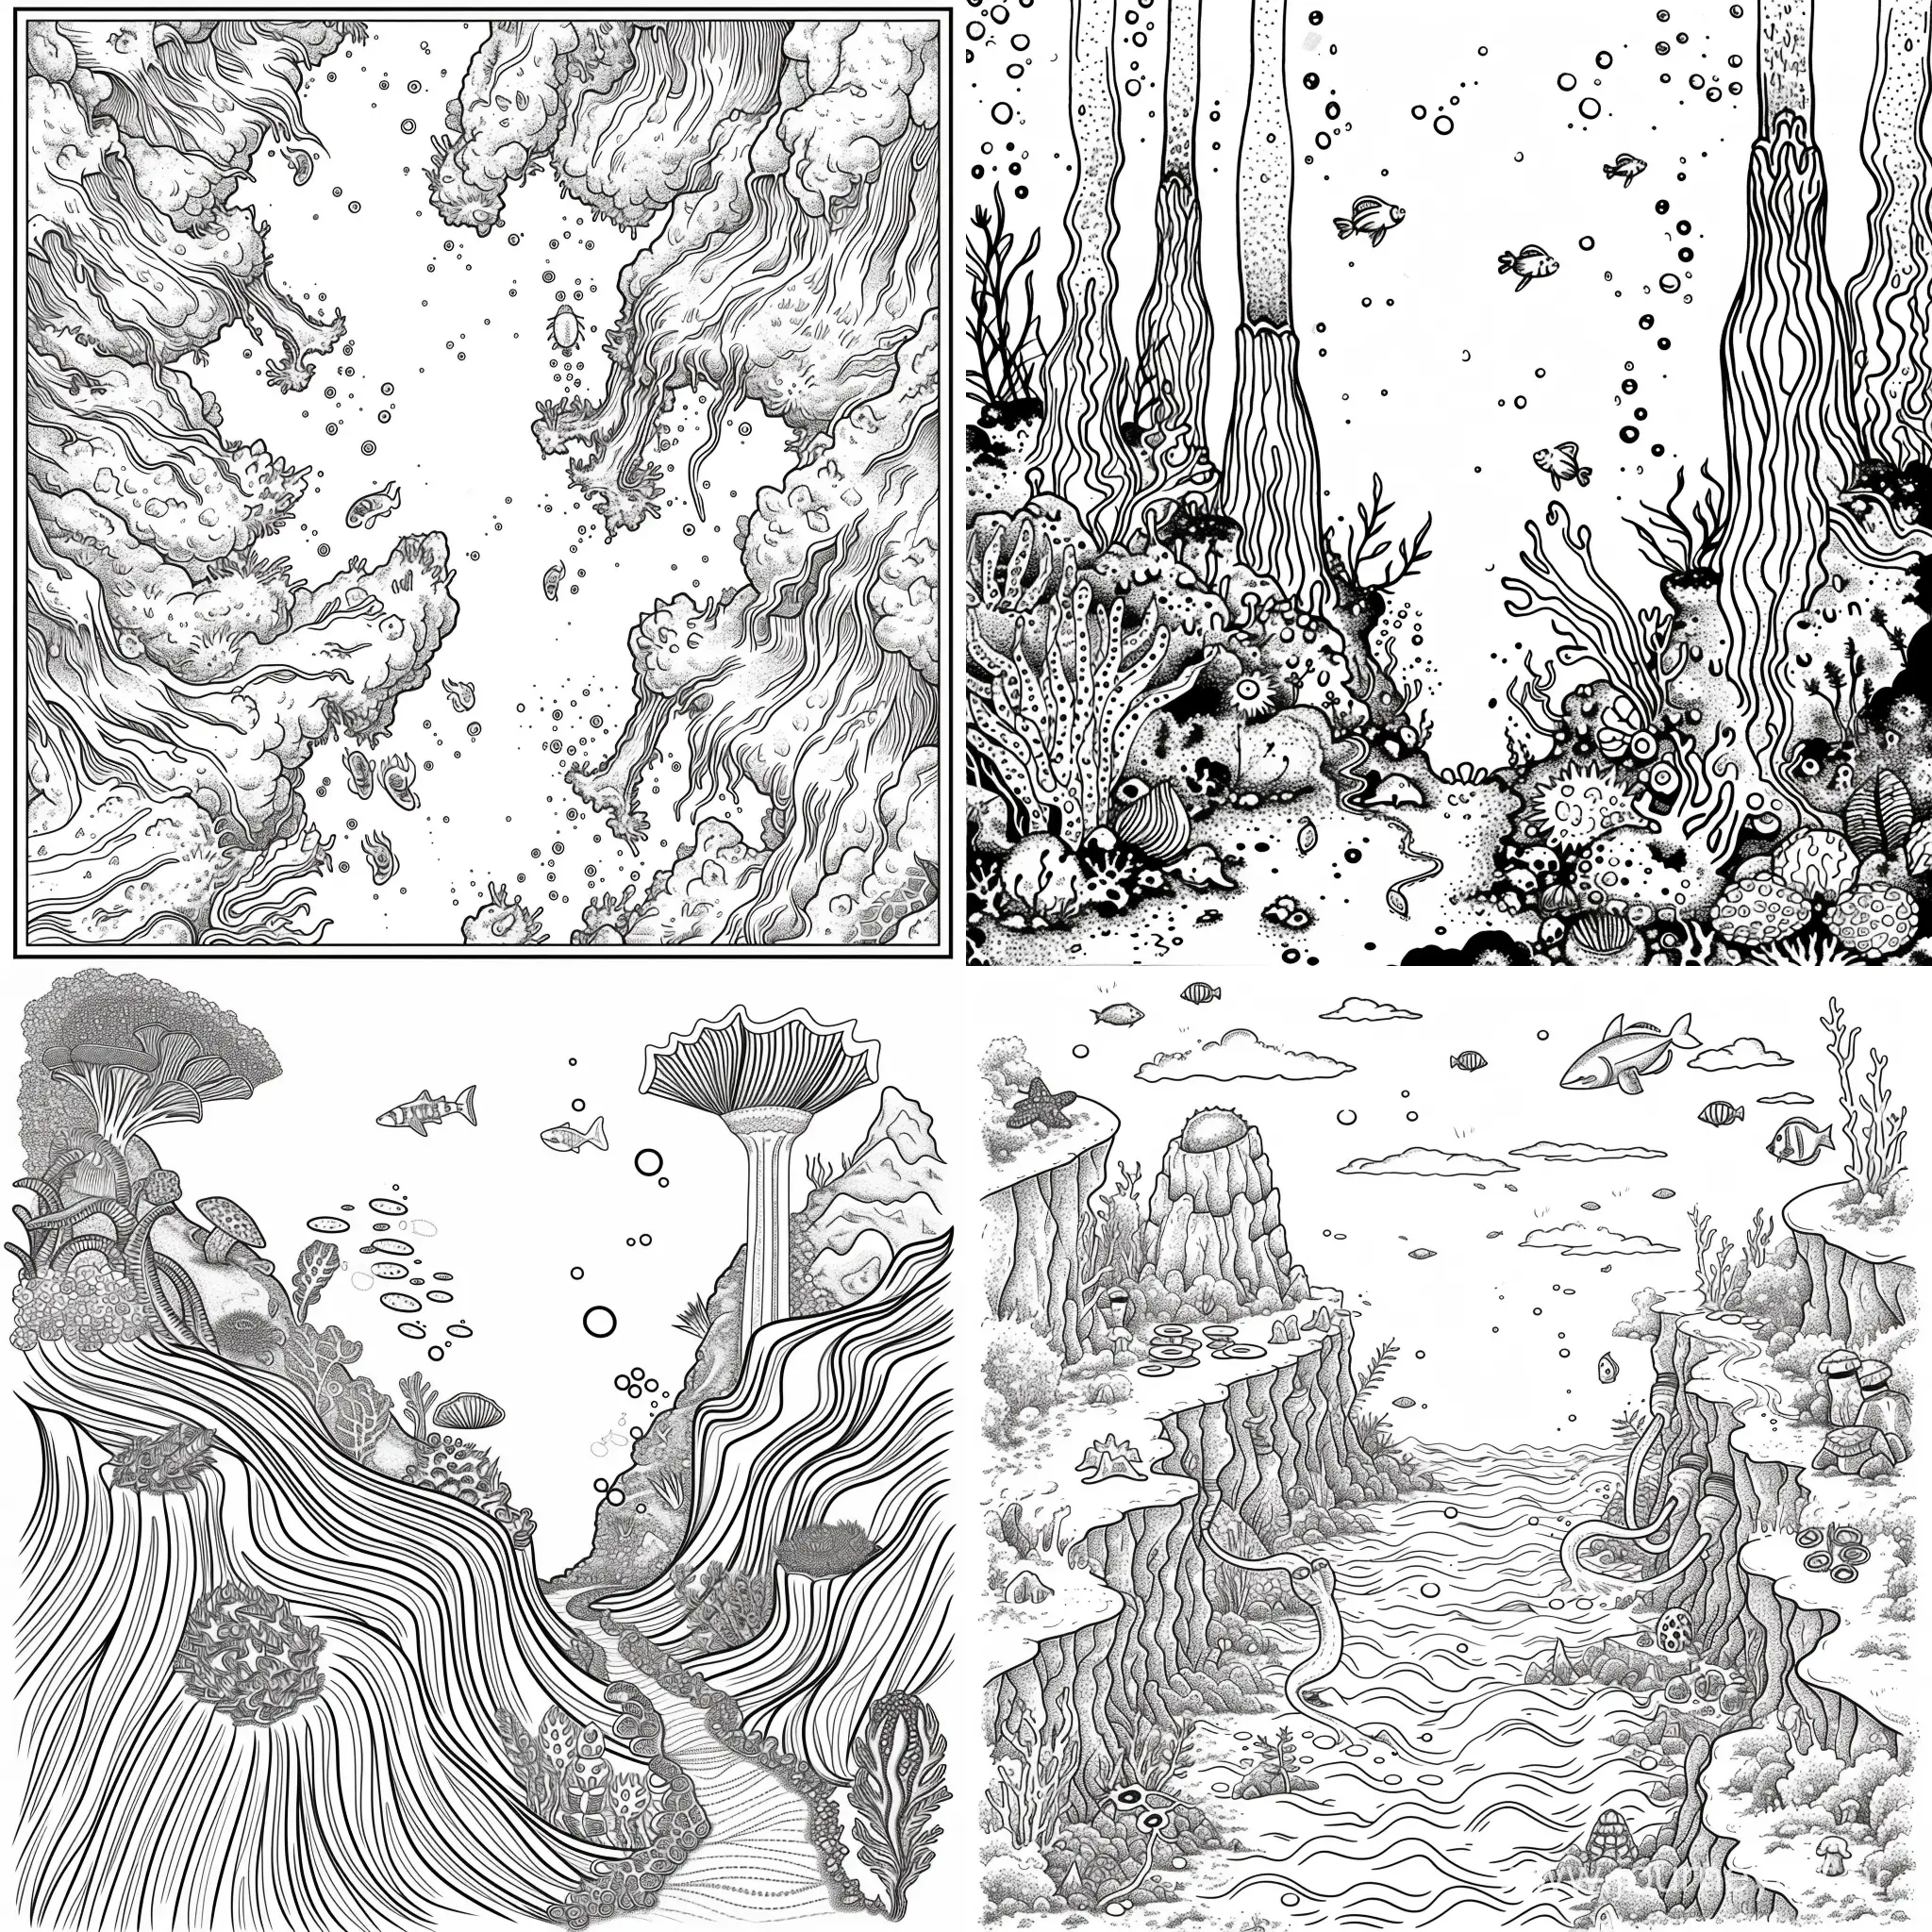 coloring book page, Underwater Volcanic Vents Teeming with Life
, Black and white, white background